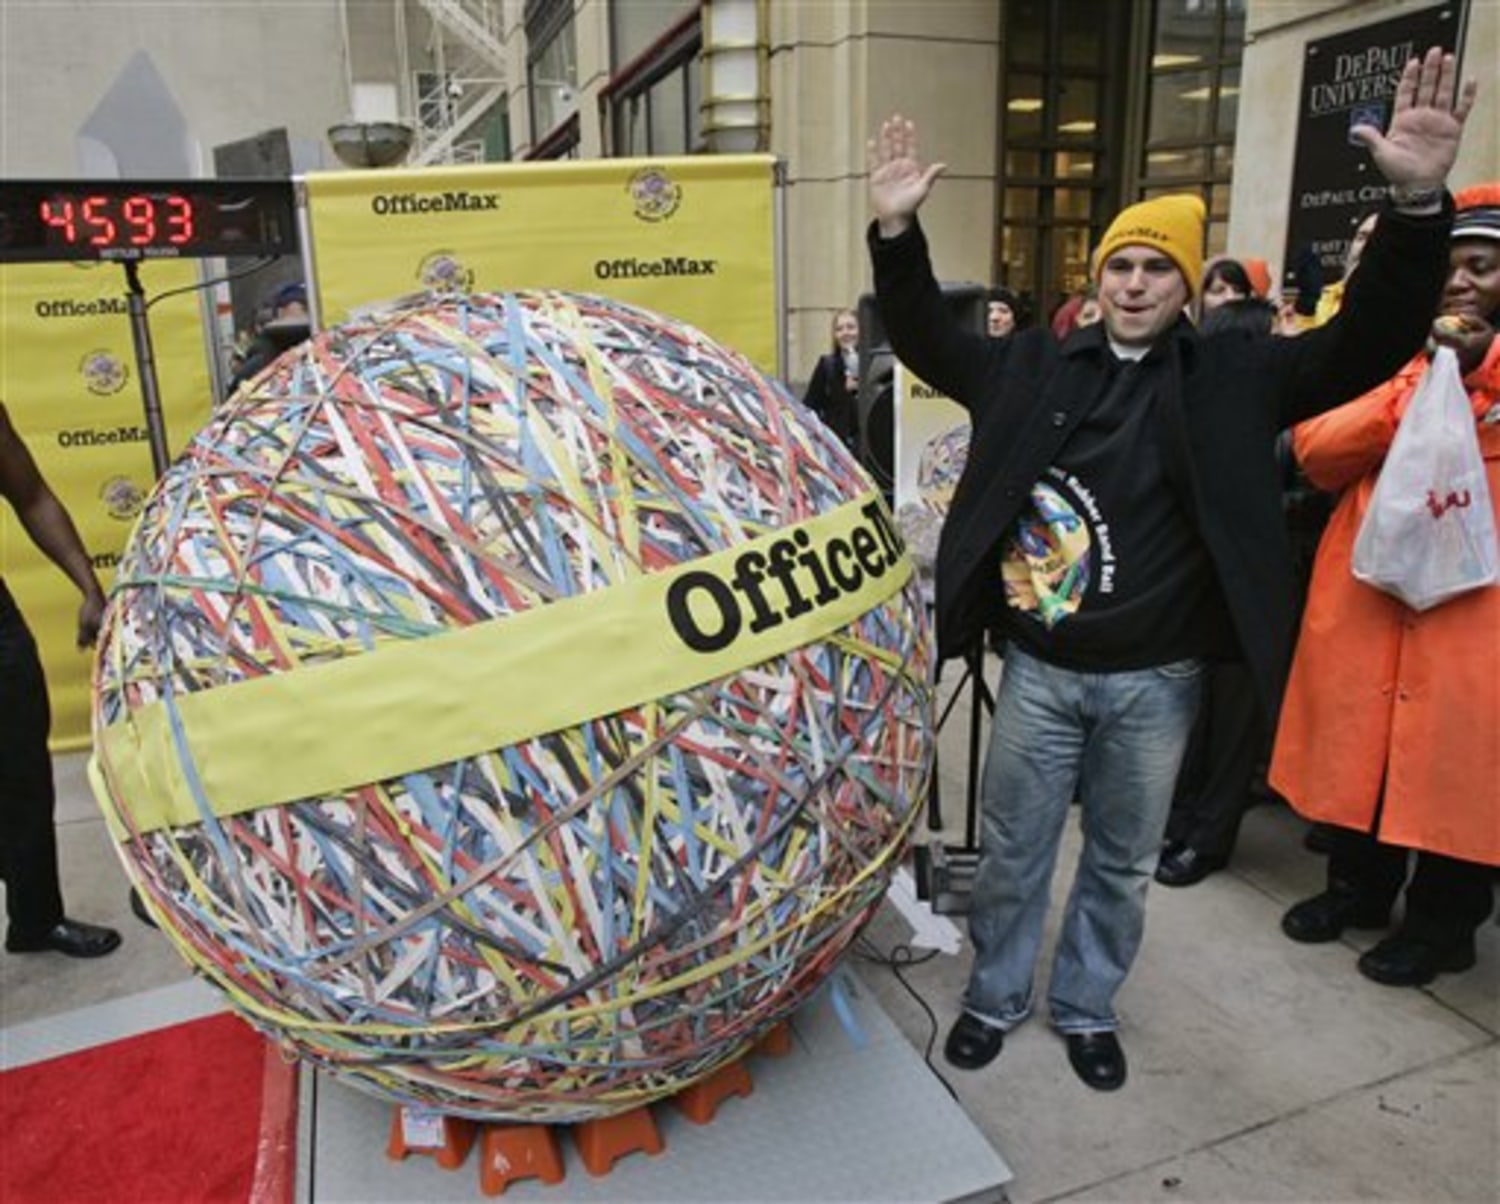 Rubber band ball sets record at 4,594 pounds